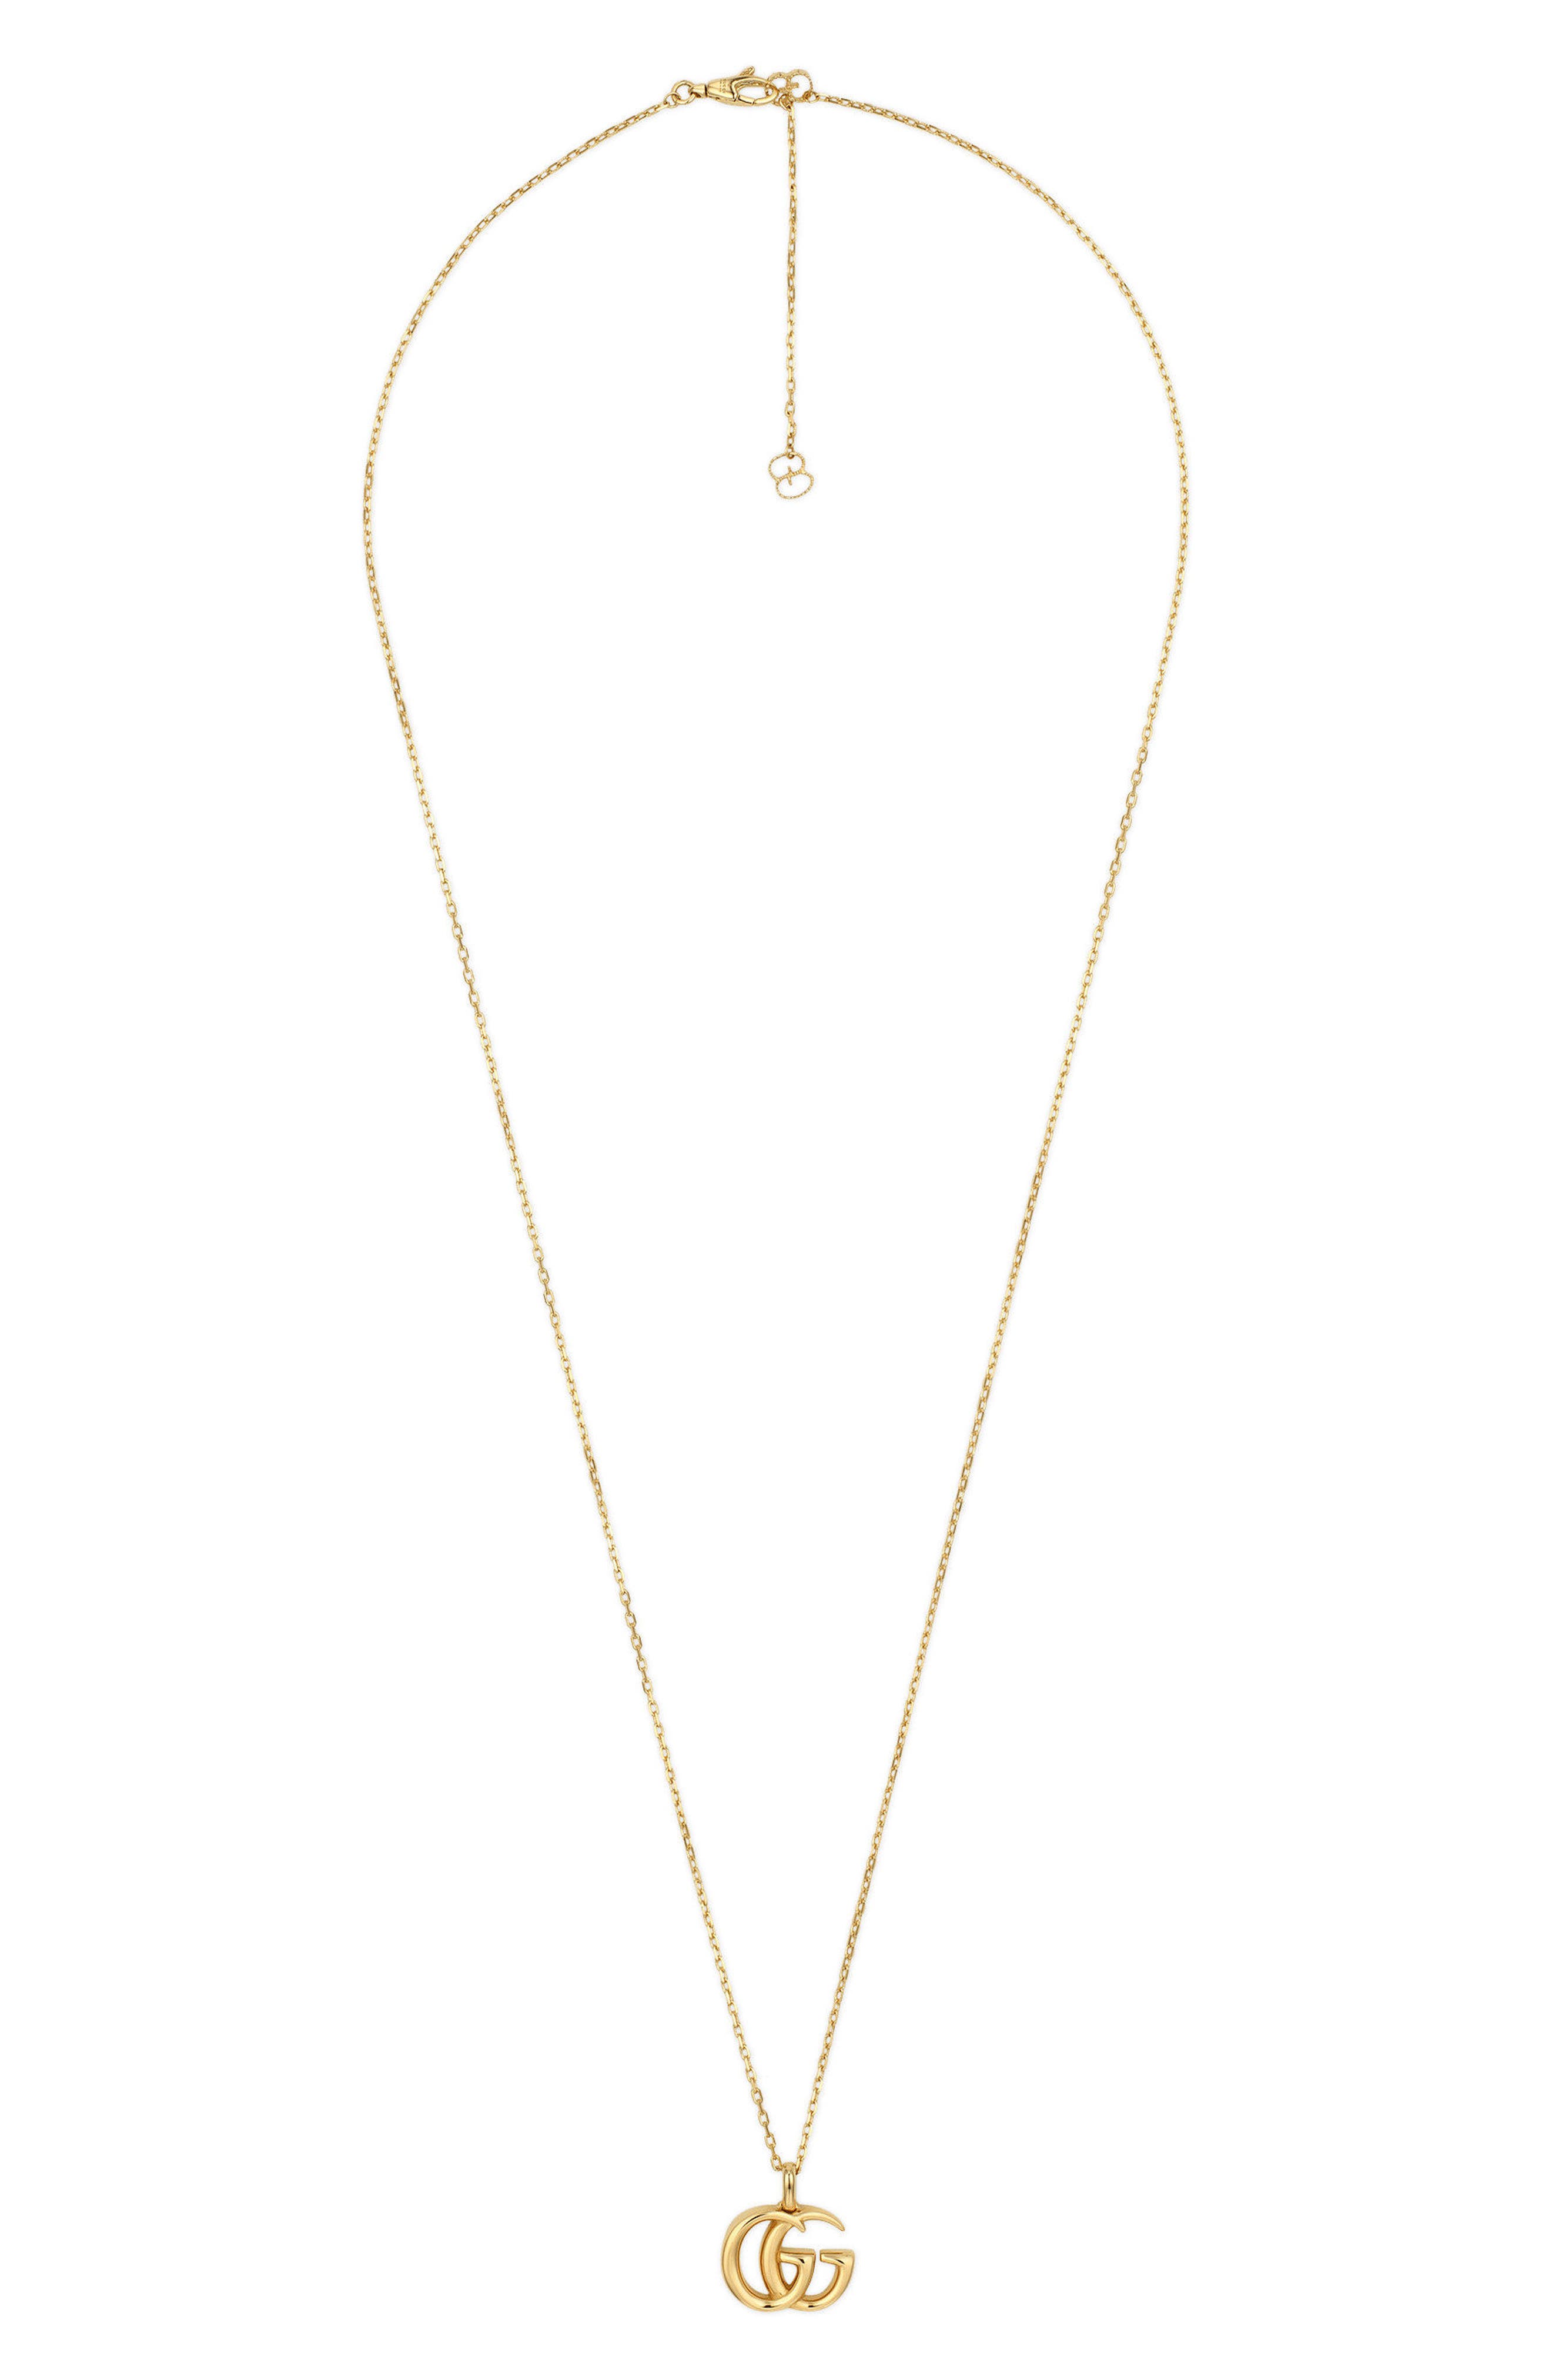 Women's 18k Gold Gucci Jewelry | Nordstrom